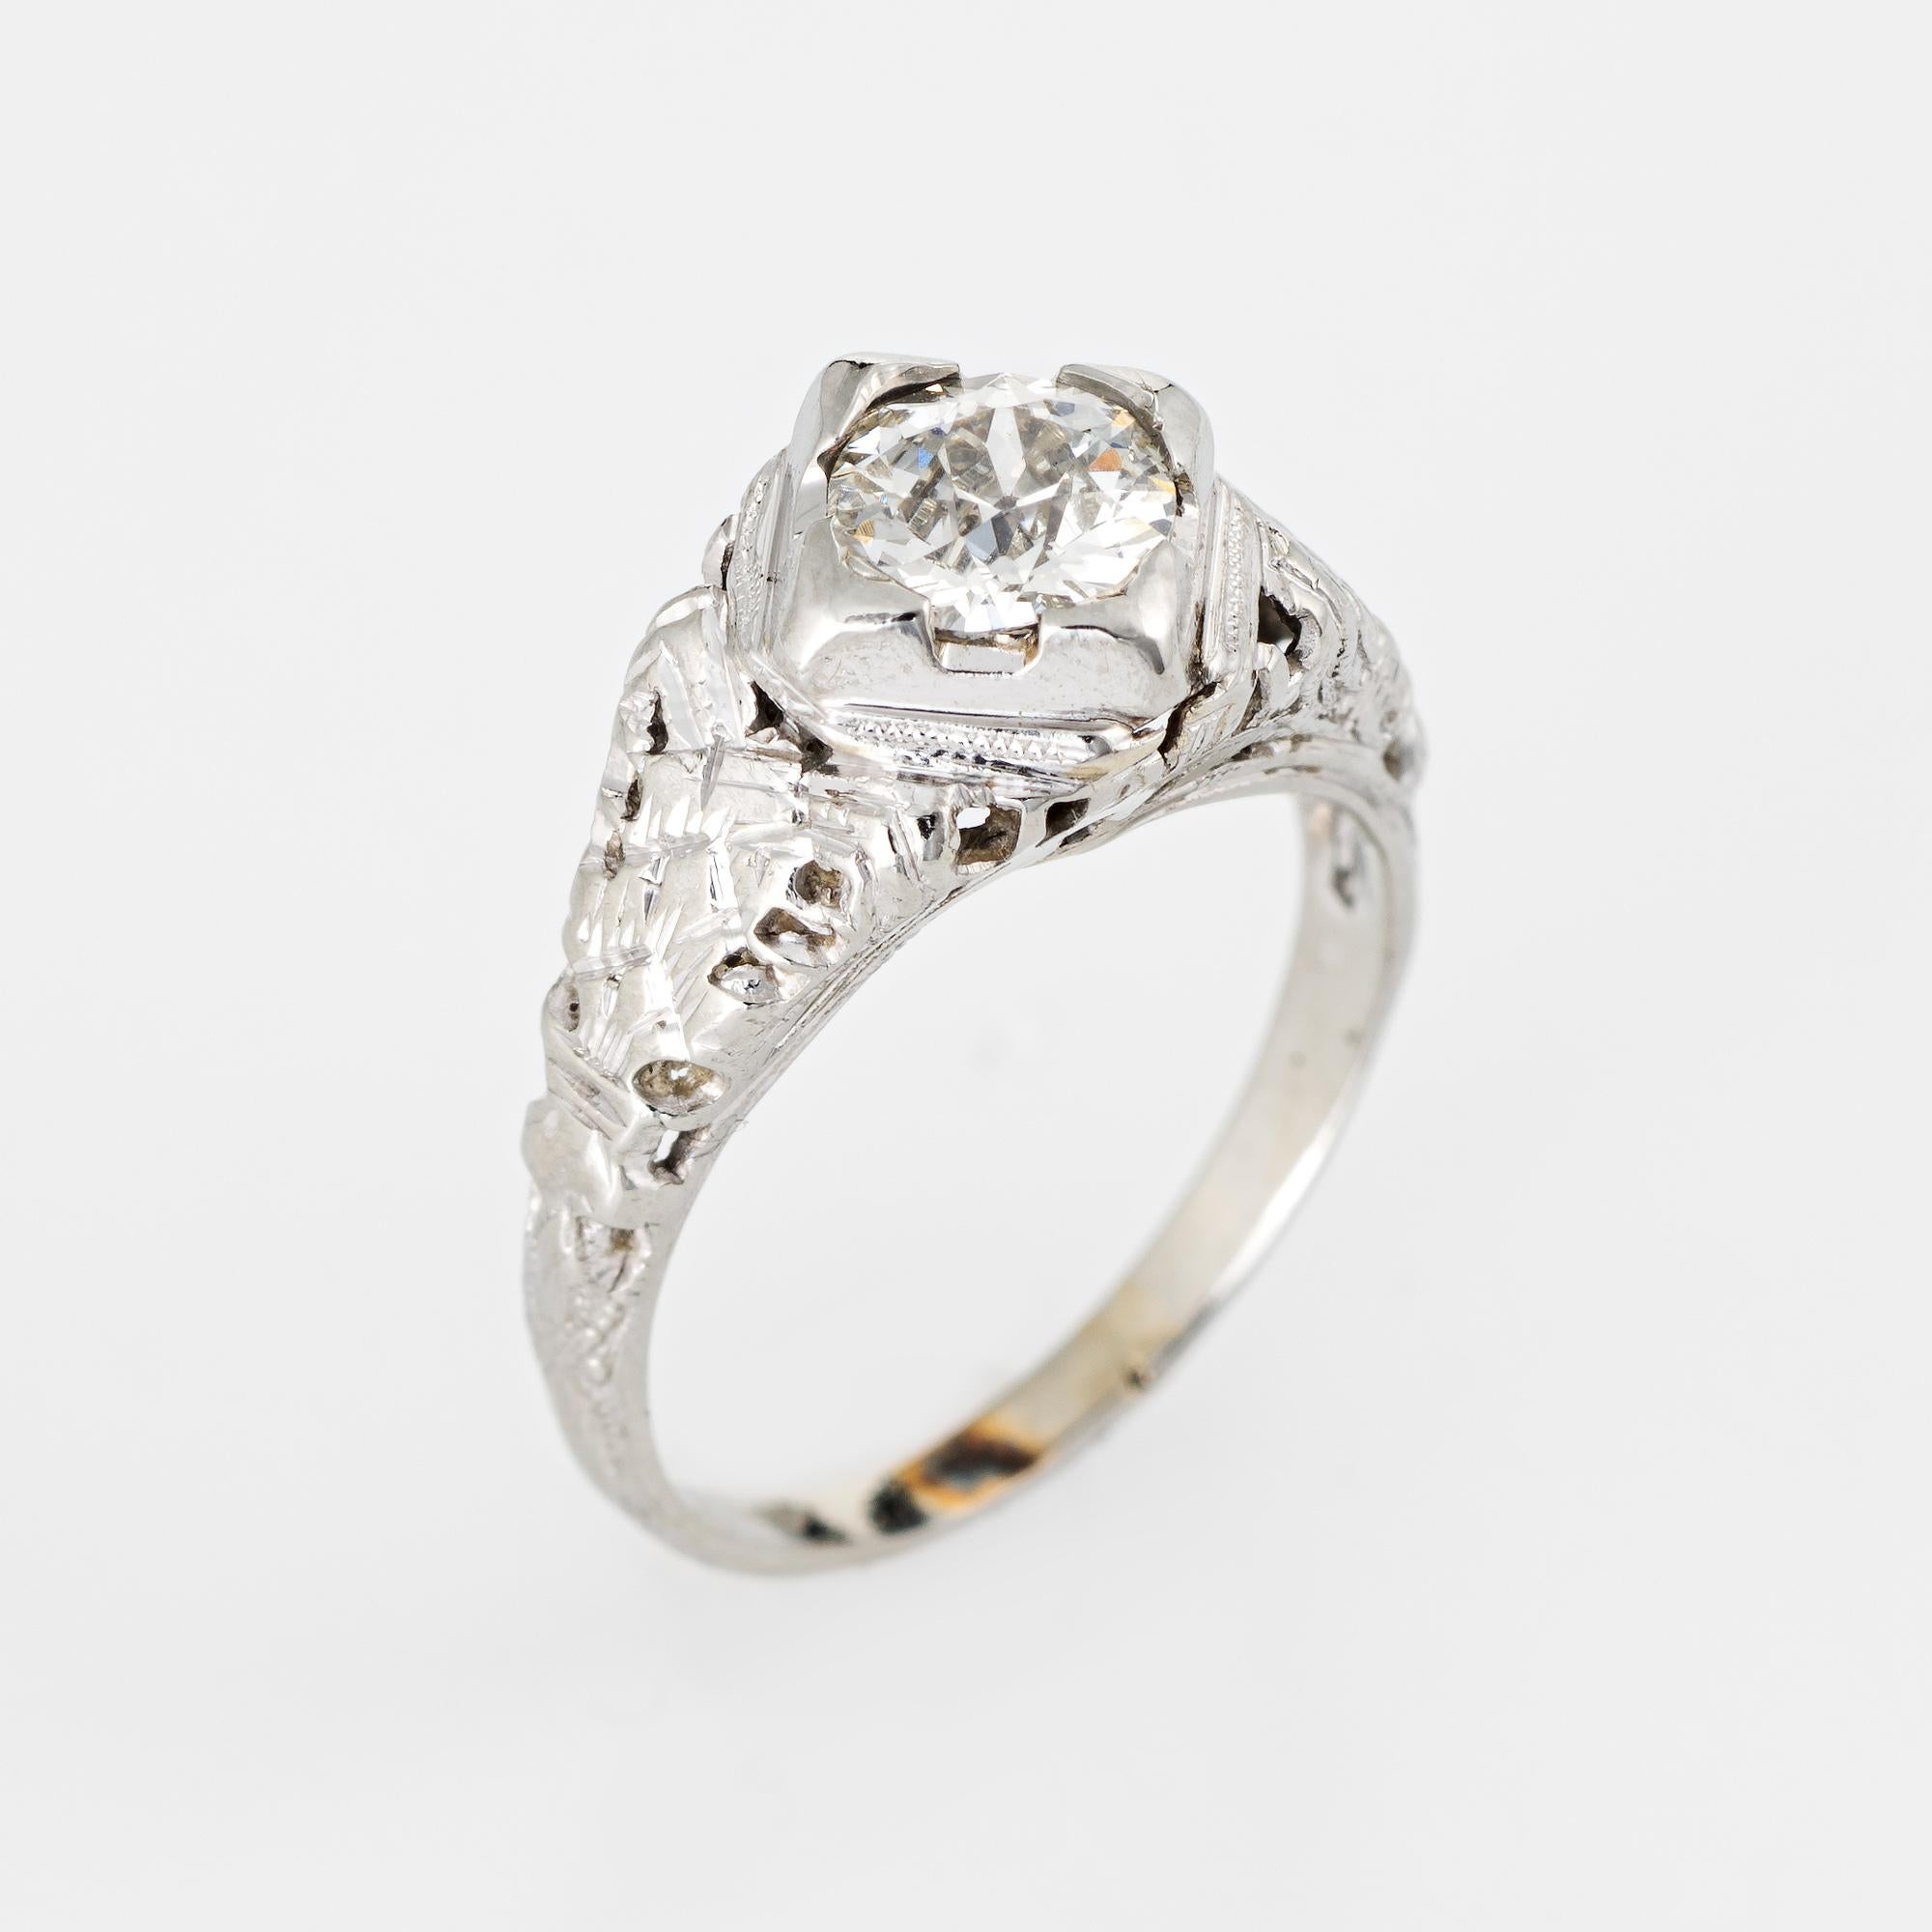 Elegant & finely detailed Art Deco era ring (circa 1920s to 1930s) crafted in 18k white gold. 

Centrally mounted estimated 0.52 carat old European cut diamond (estimated at H-I color and VS2 clarity).    

The ring epitomizes vintage charm and